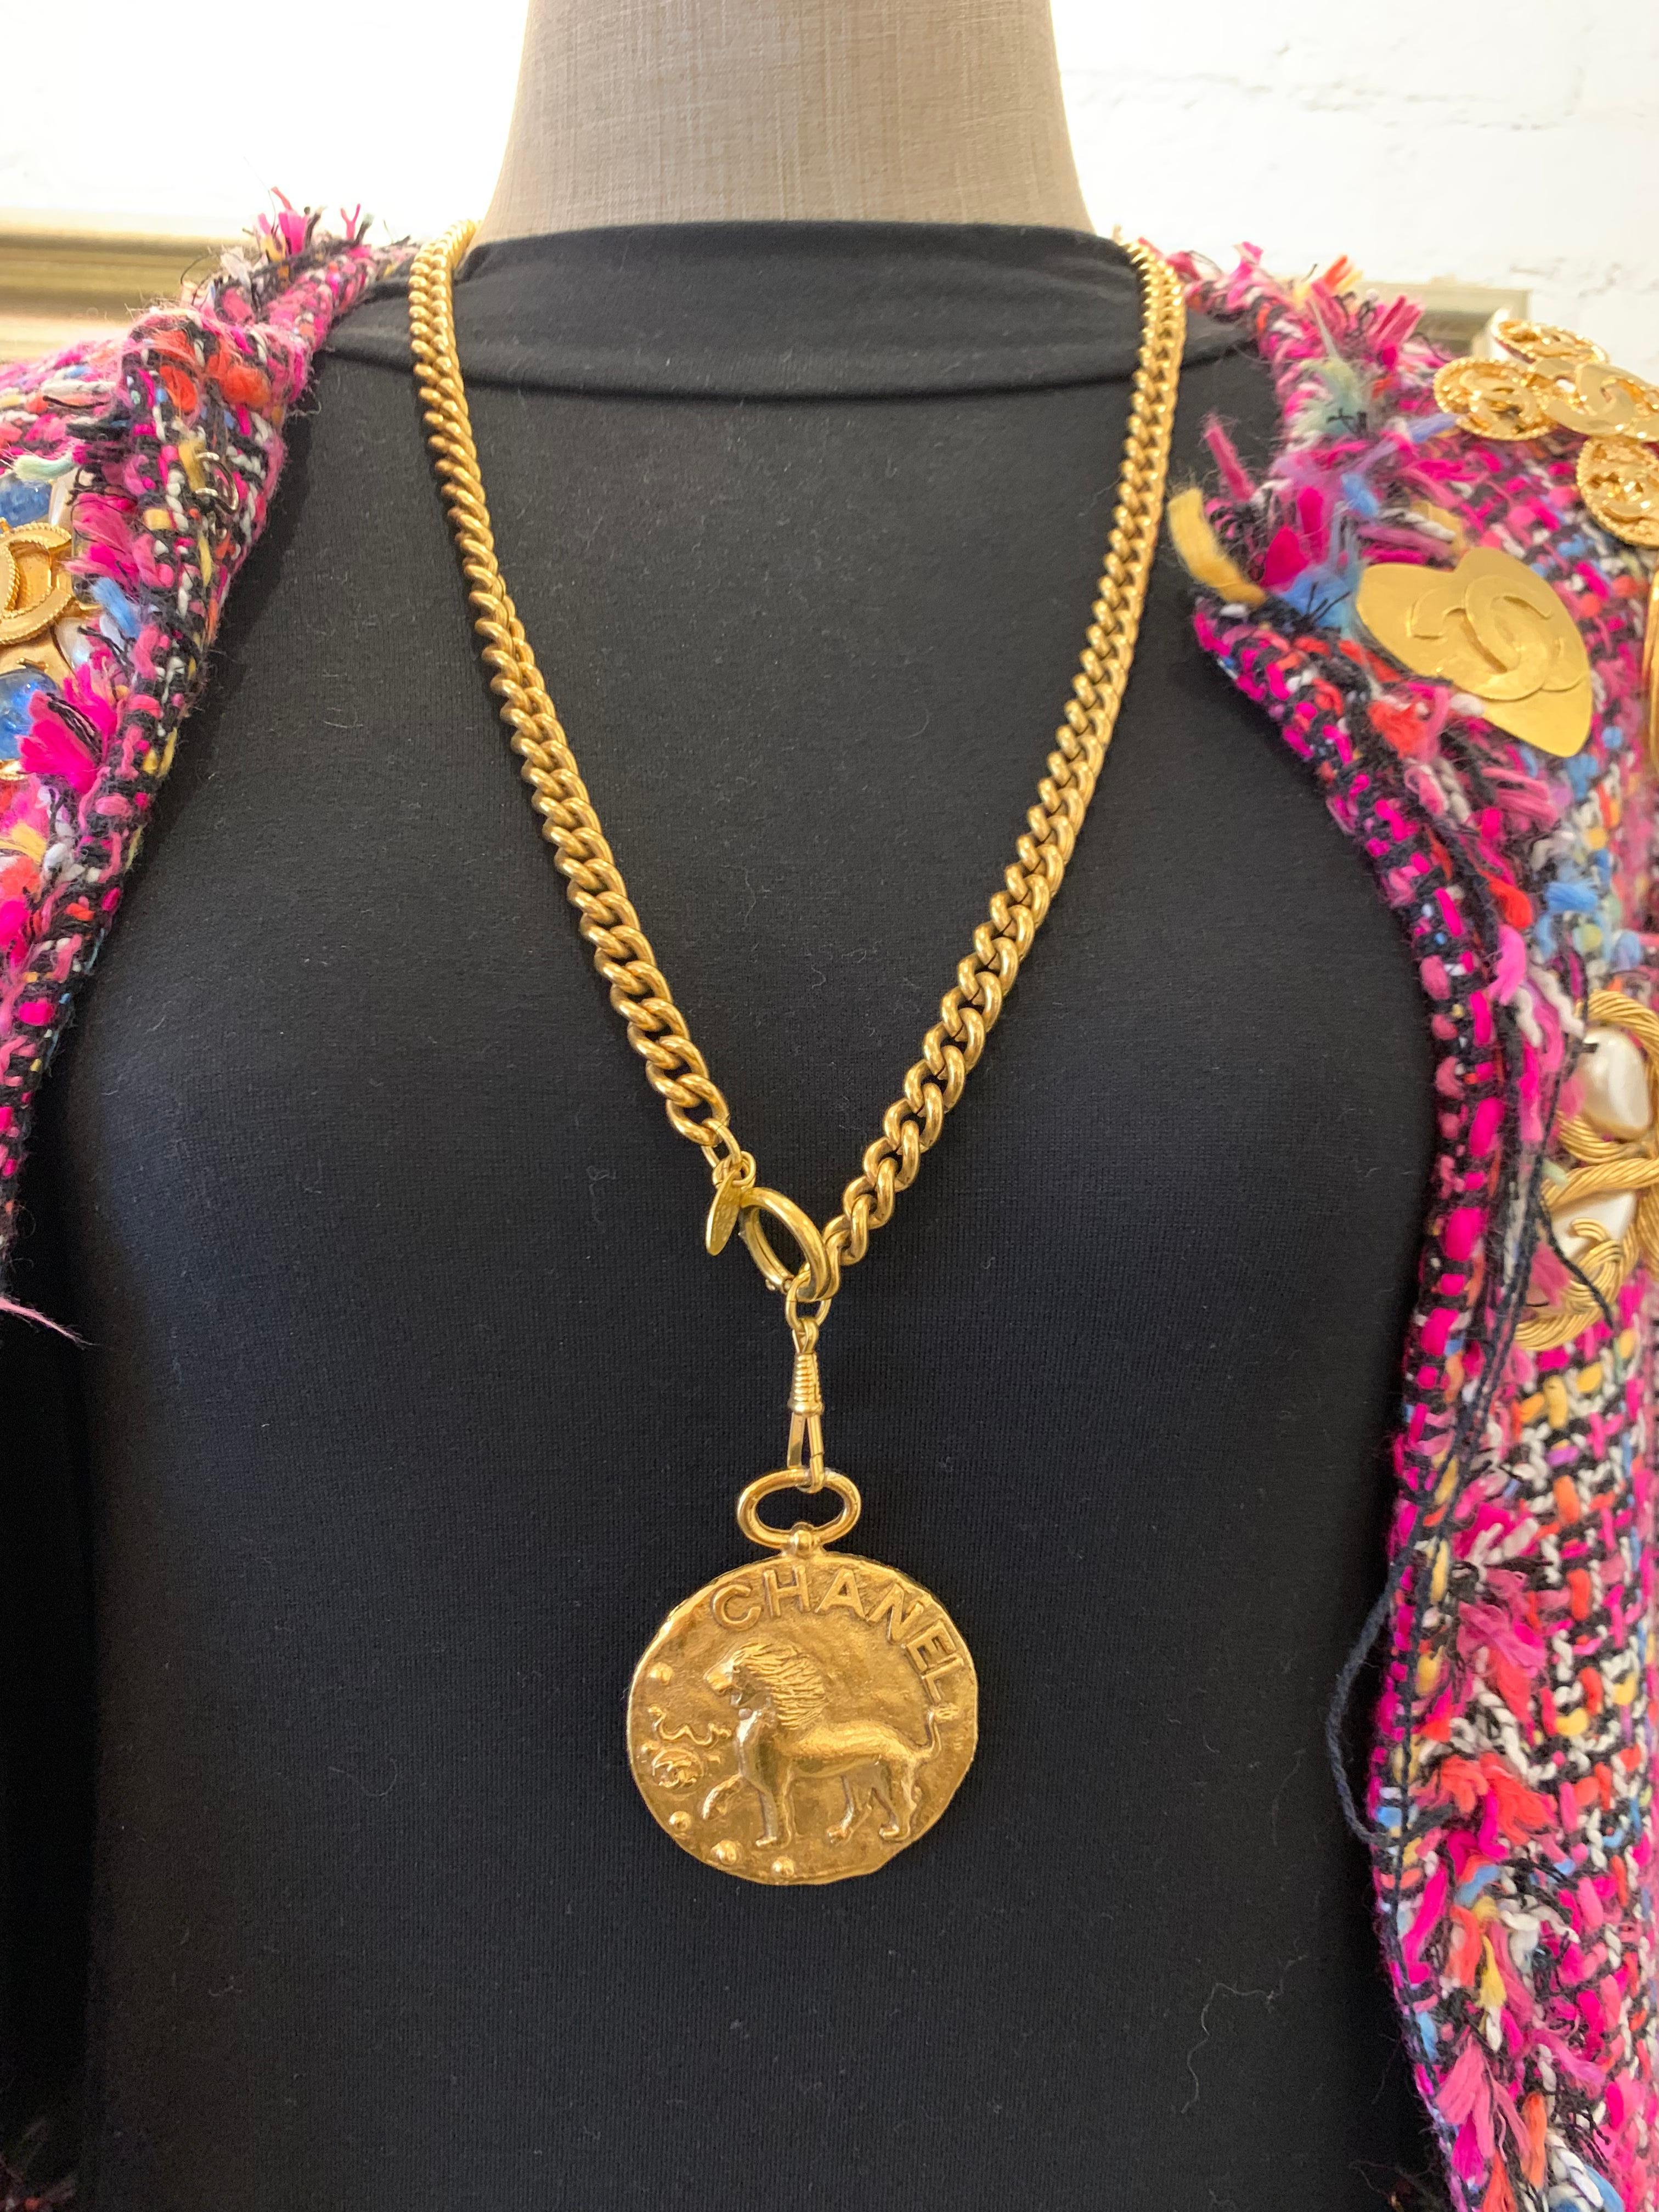 1980s vintage Chanel good toned chain necklace featuring a gold toned lion charm. Proud and regal, the lion has been used a reflection of Gabrielle Chanel's own power and independence. It also evokes her love for Venice, the city she visited often,